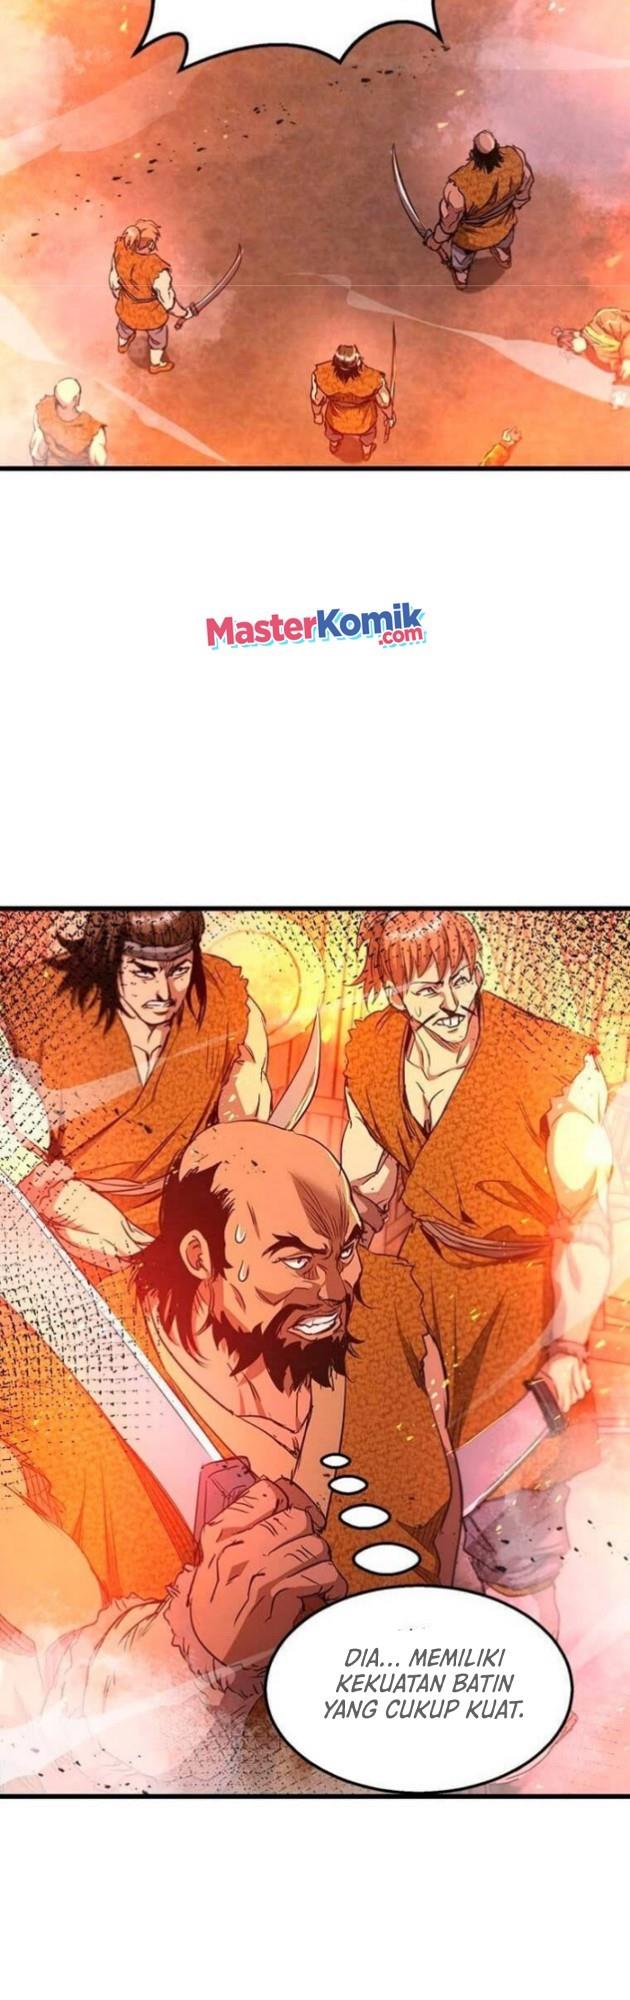 Strongest Fighter Chapter 64